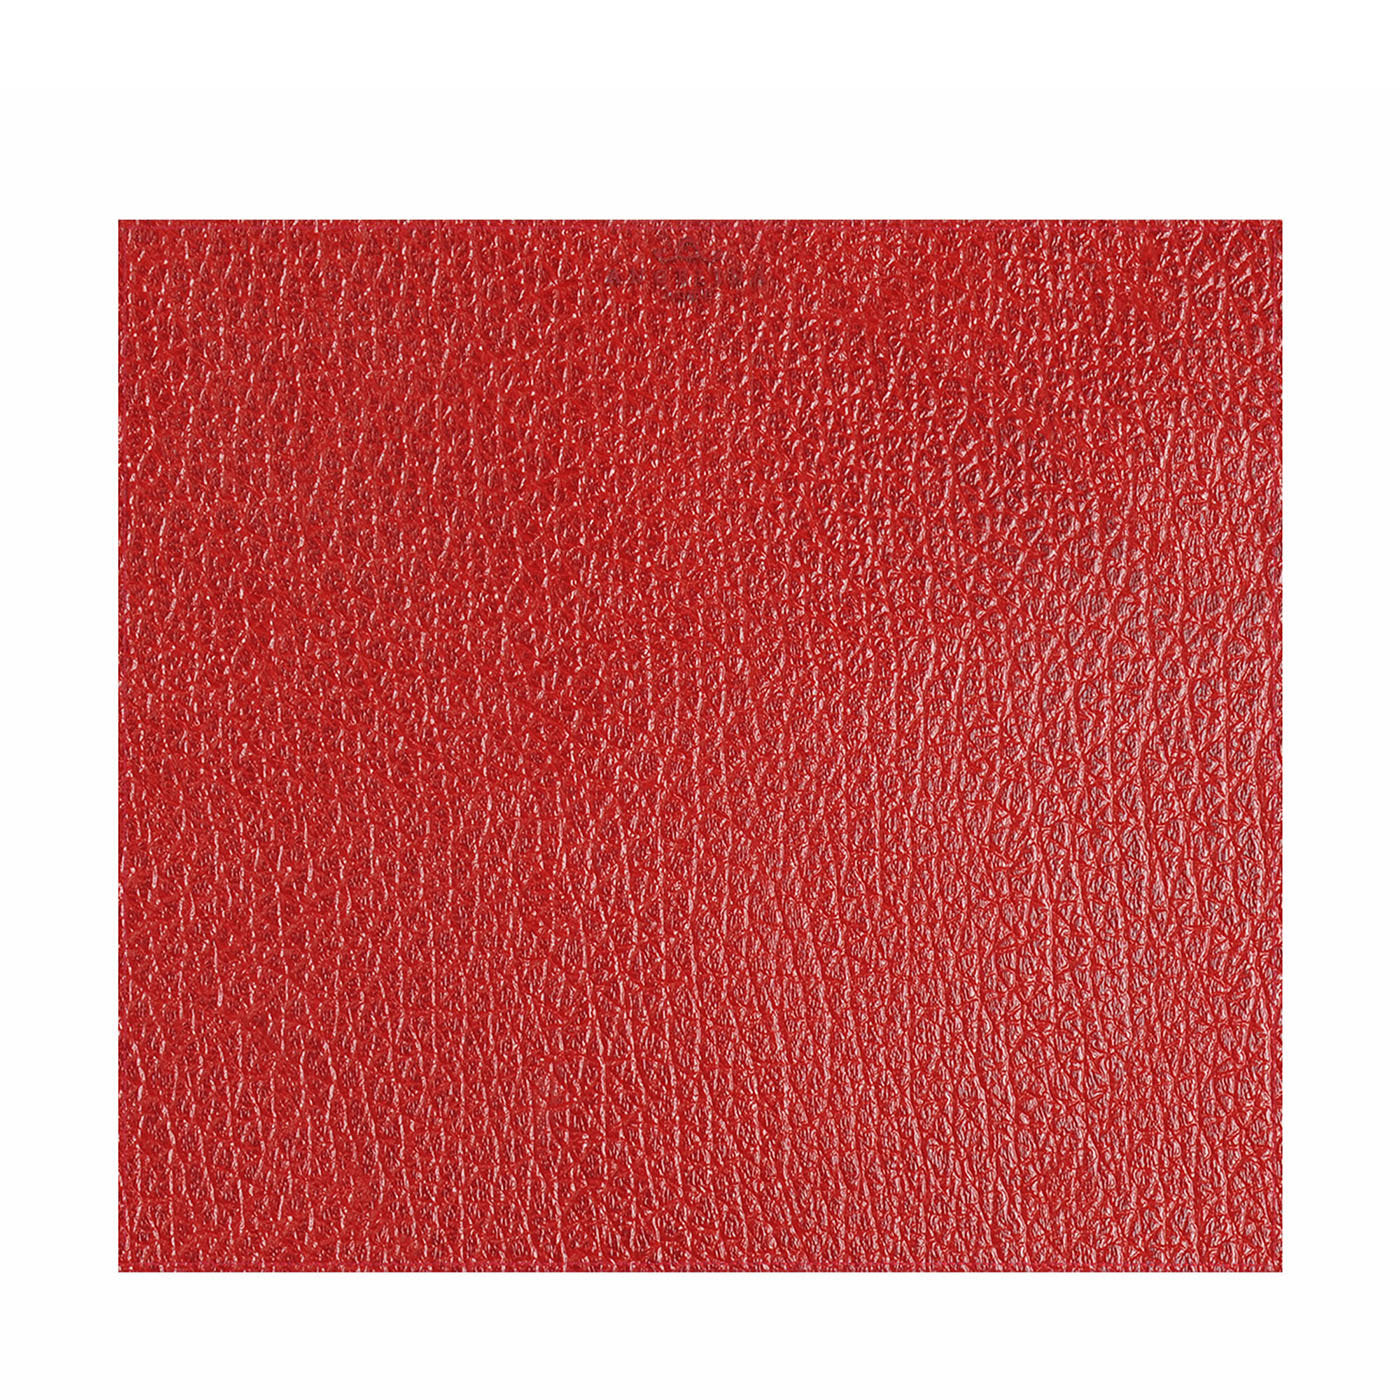 Tanzania Extra-Small Set of 2 Rectangular Red Leather Placemats - Alternative view 1